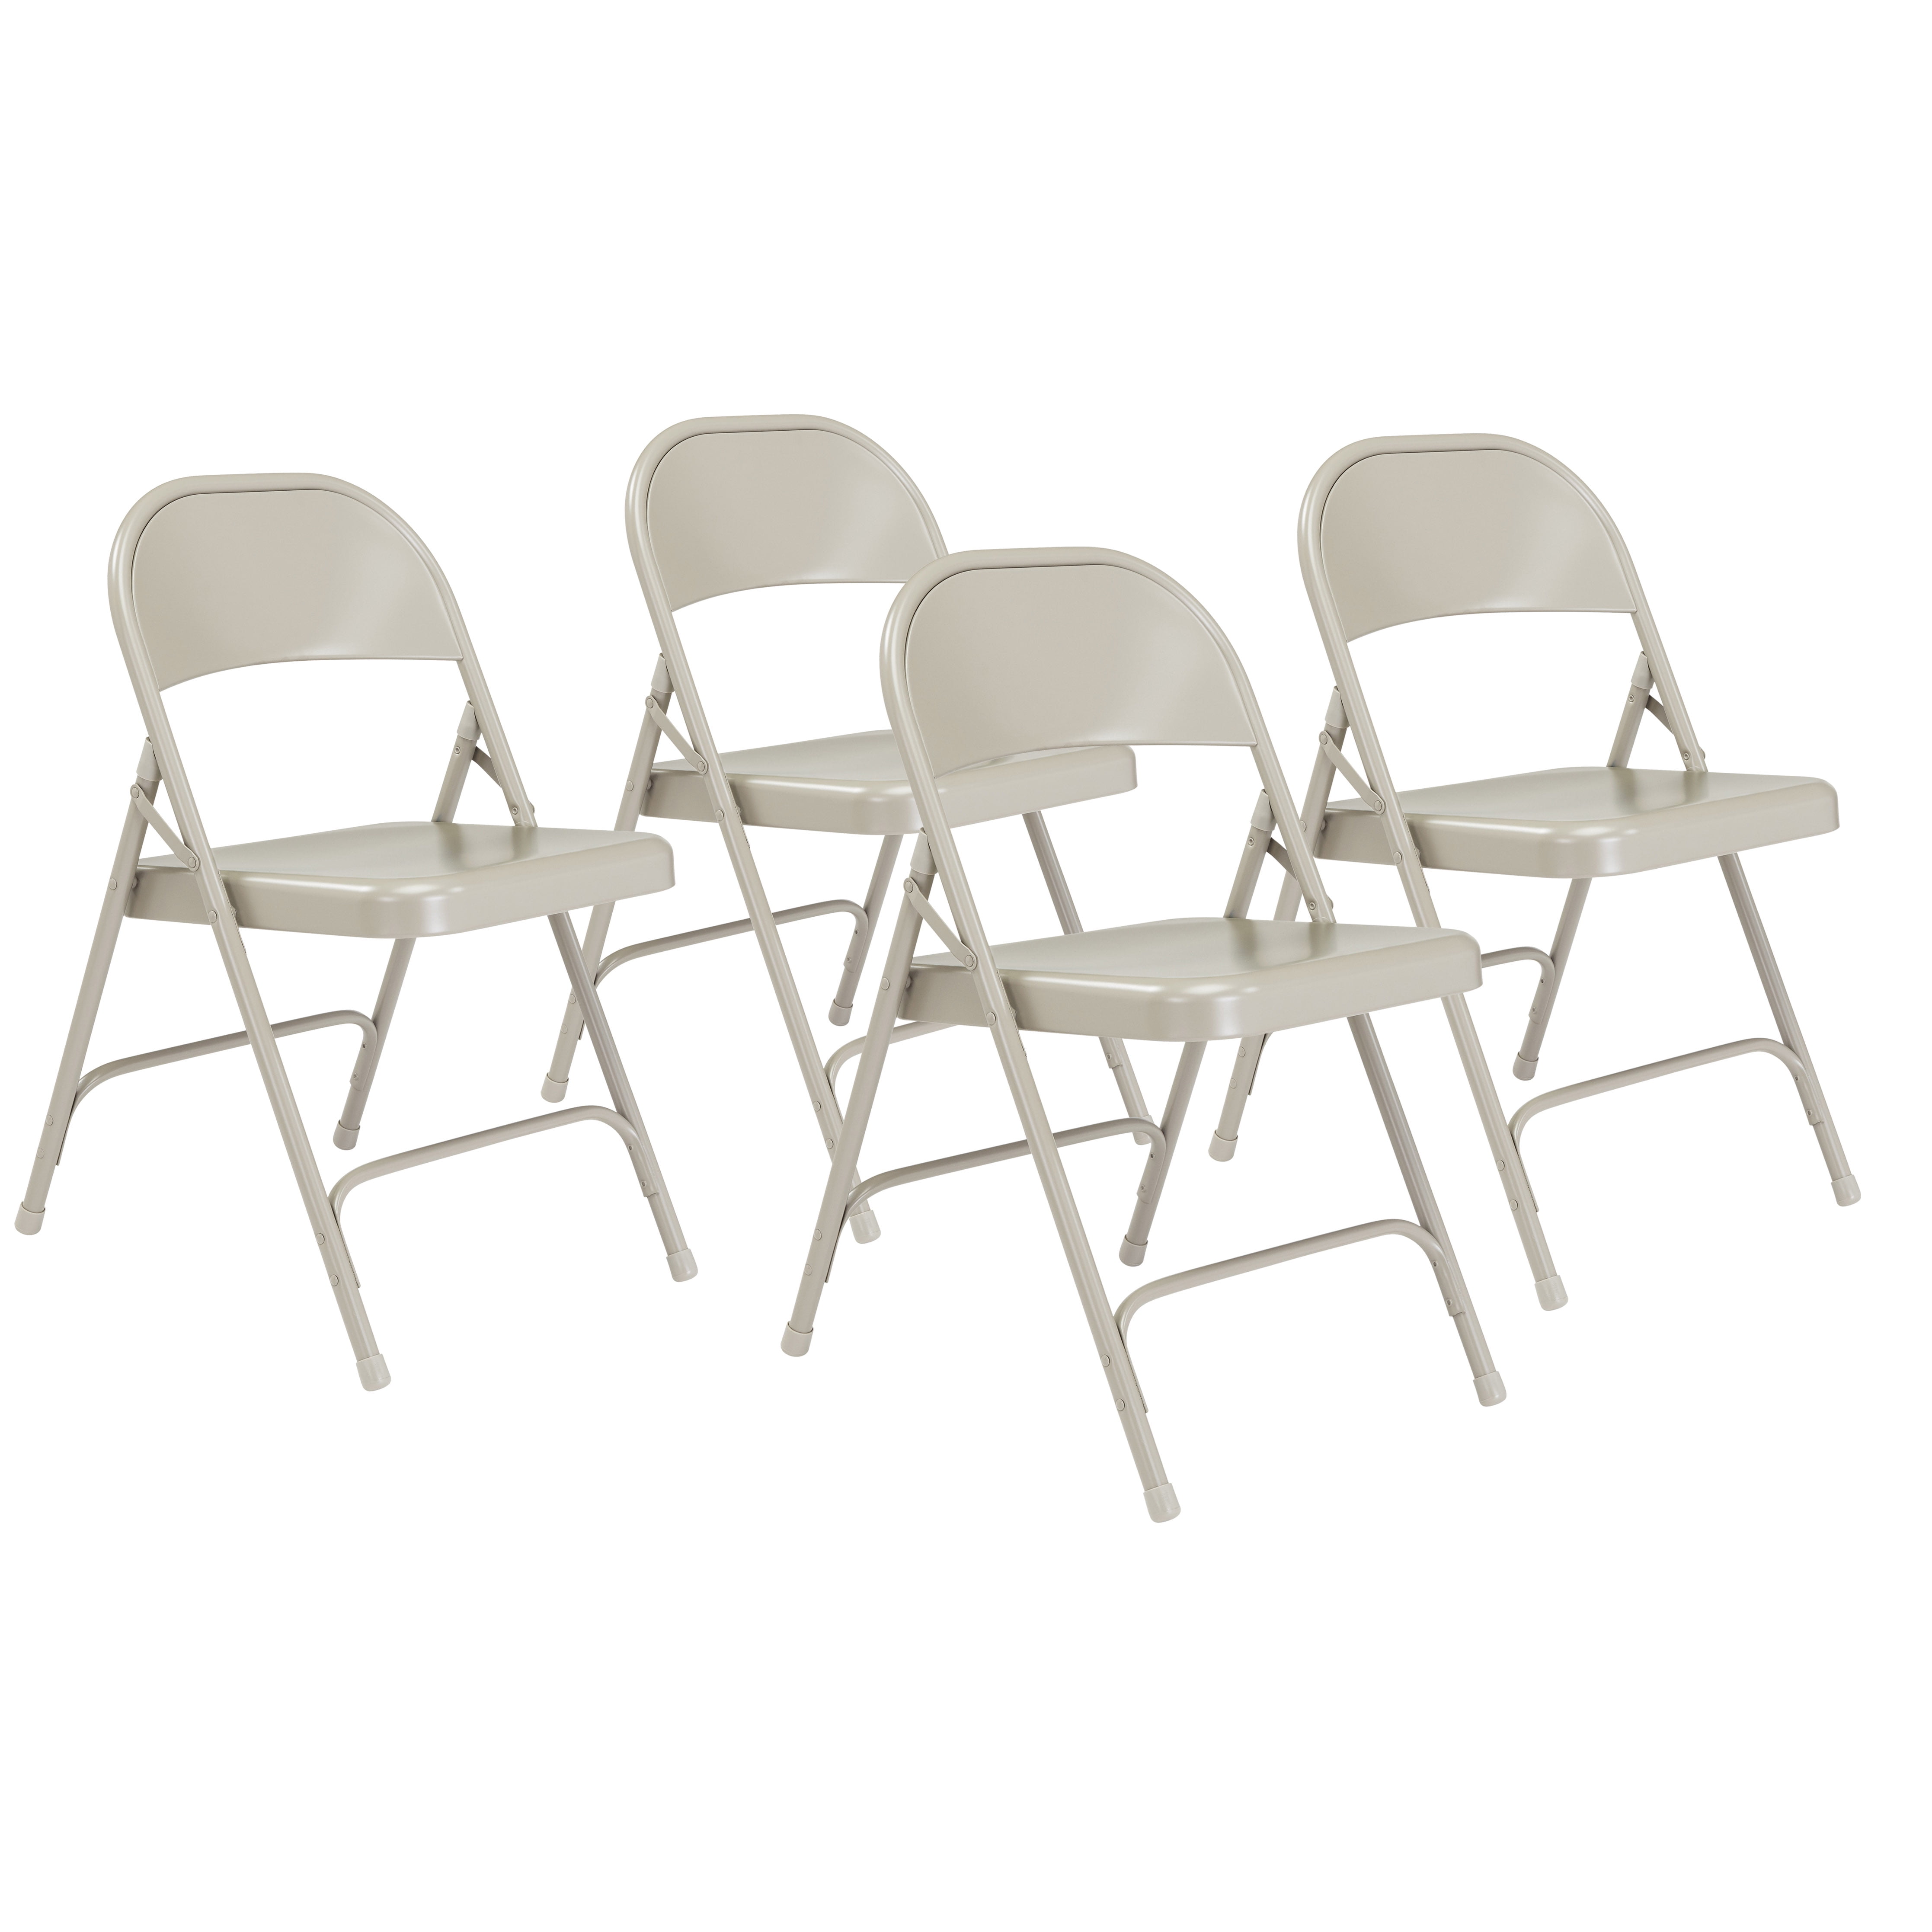 Chairs Low Profile Flat Nail-in Glides Feet Wood Table Set of 50 & Stools NC 